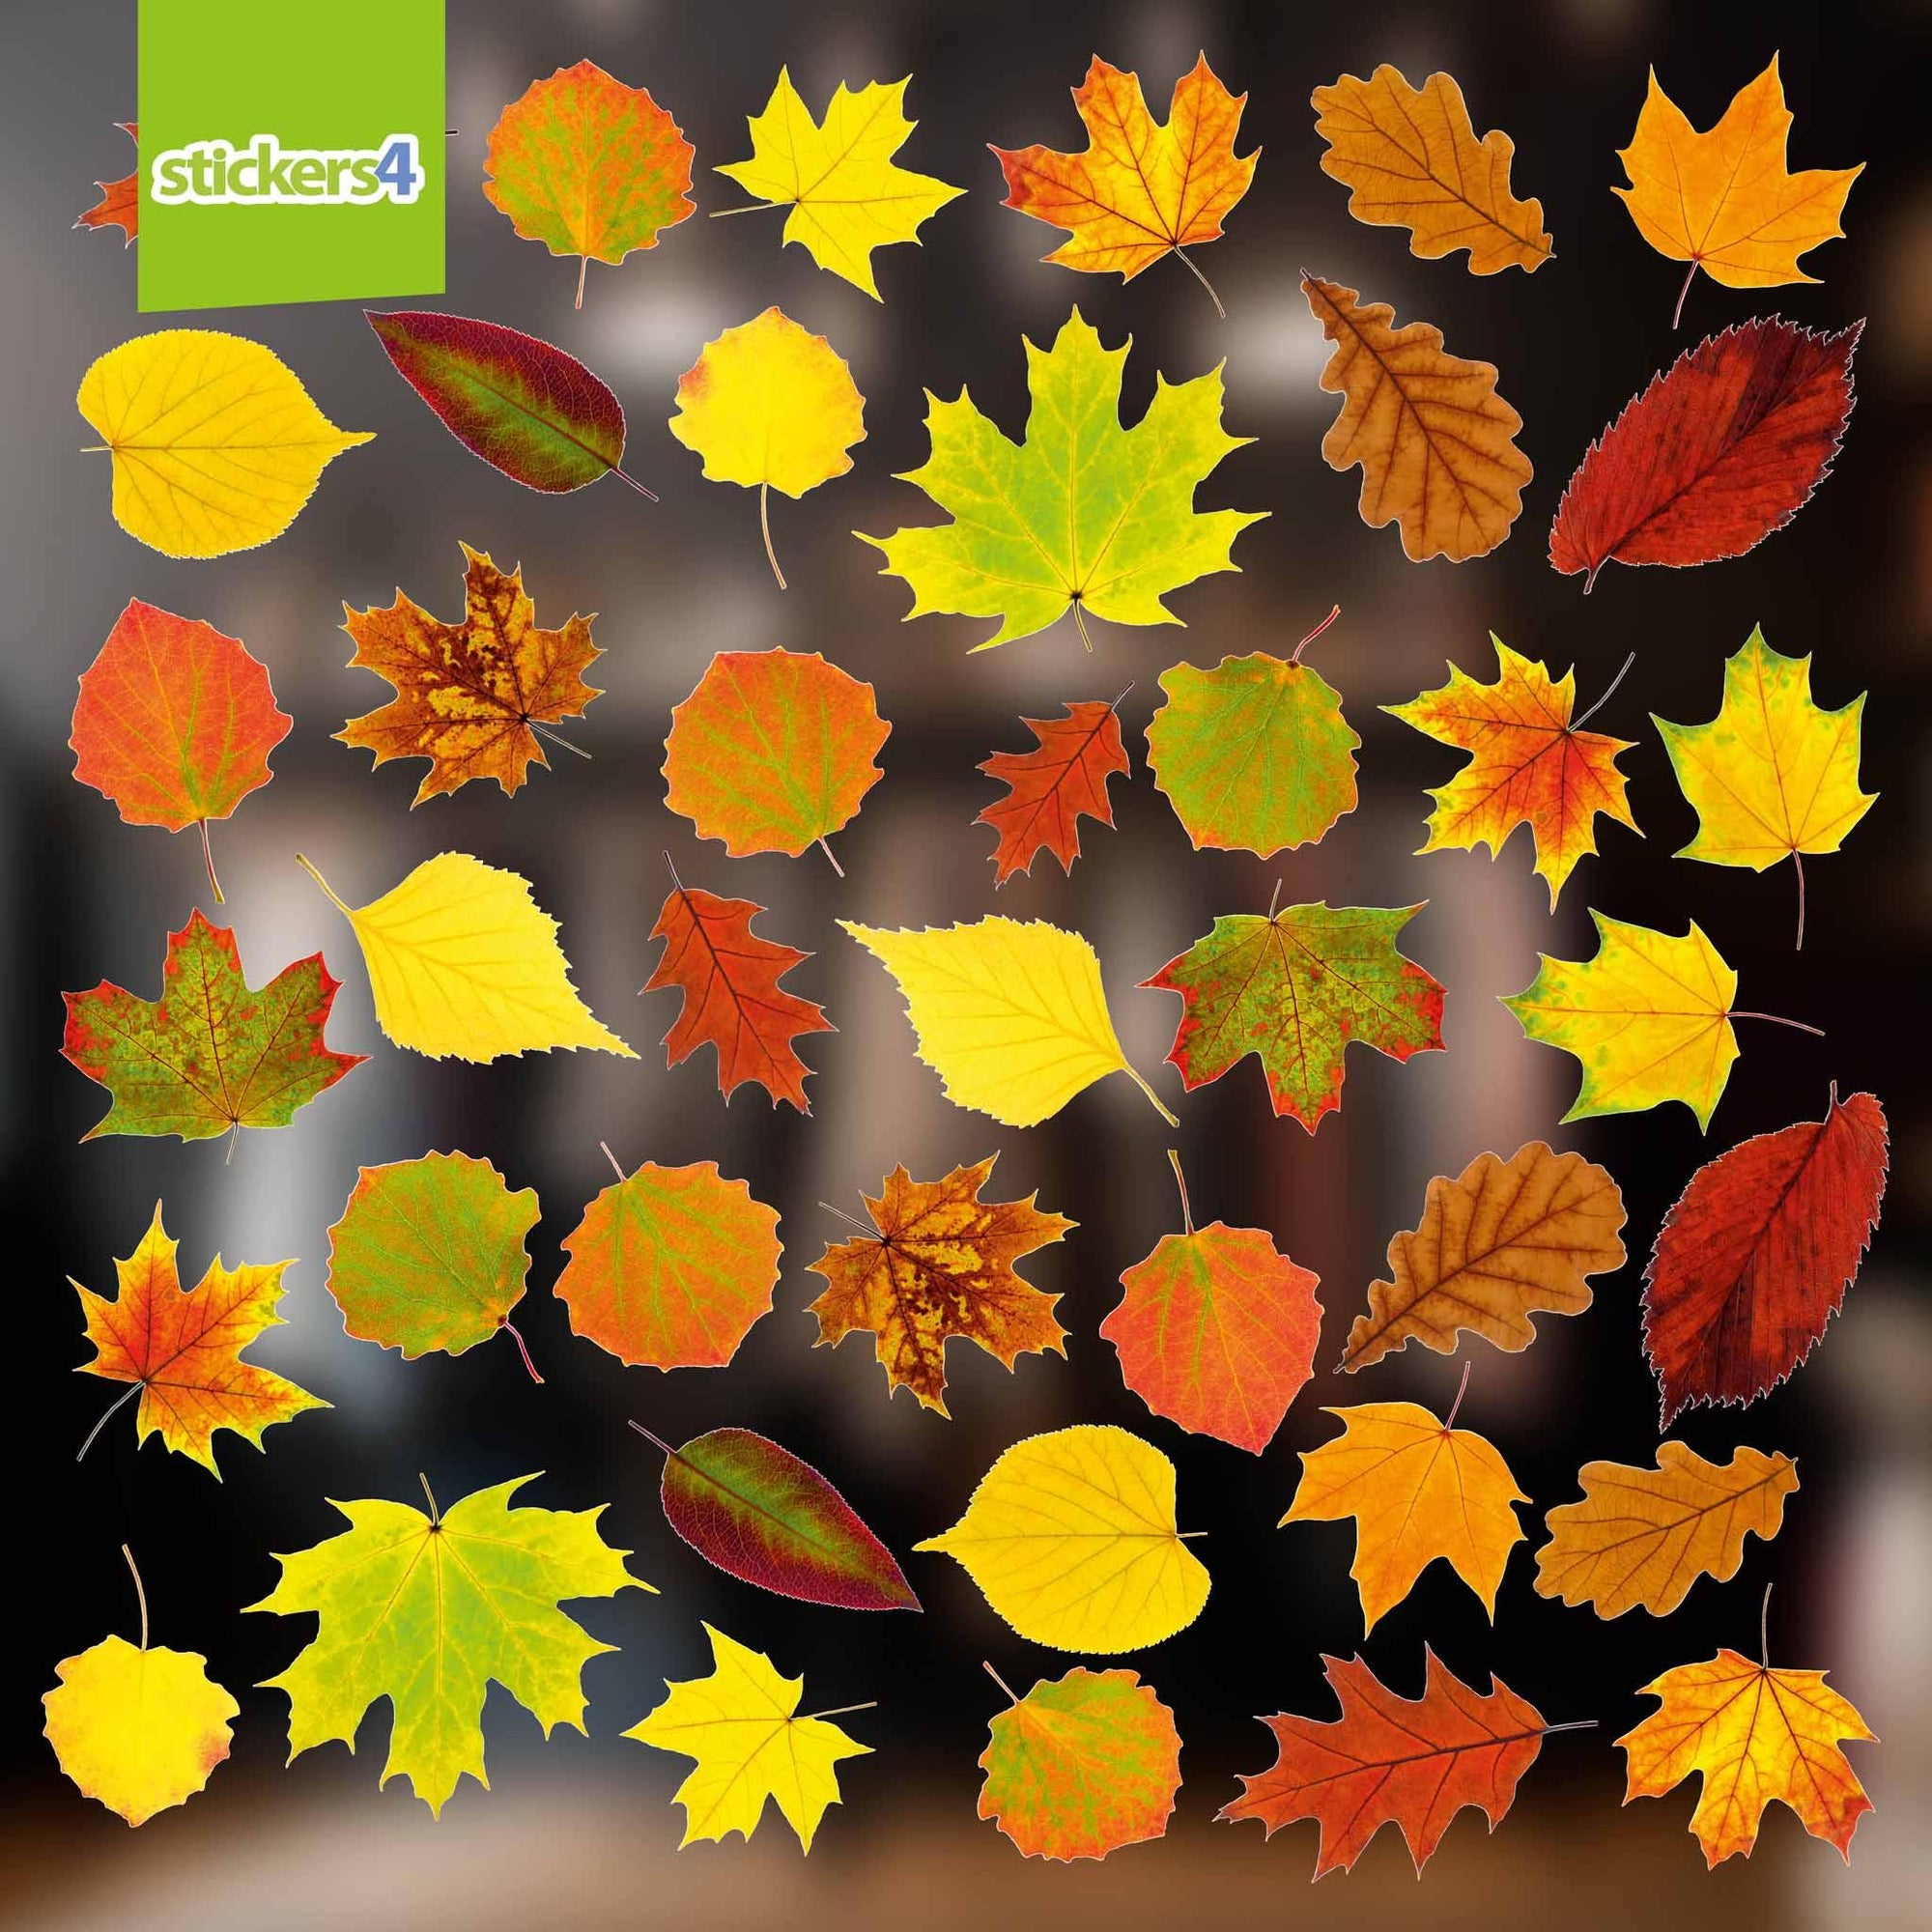 Photorealistic Autumn Leaves Shop Window Stickers - Pack 2 Autumn Window Display